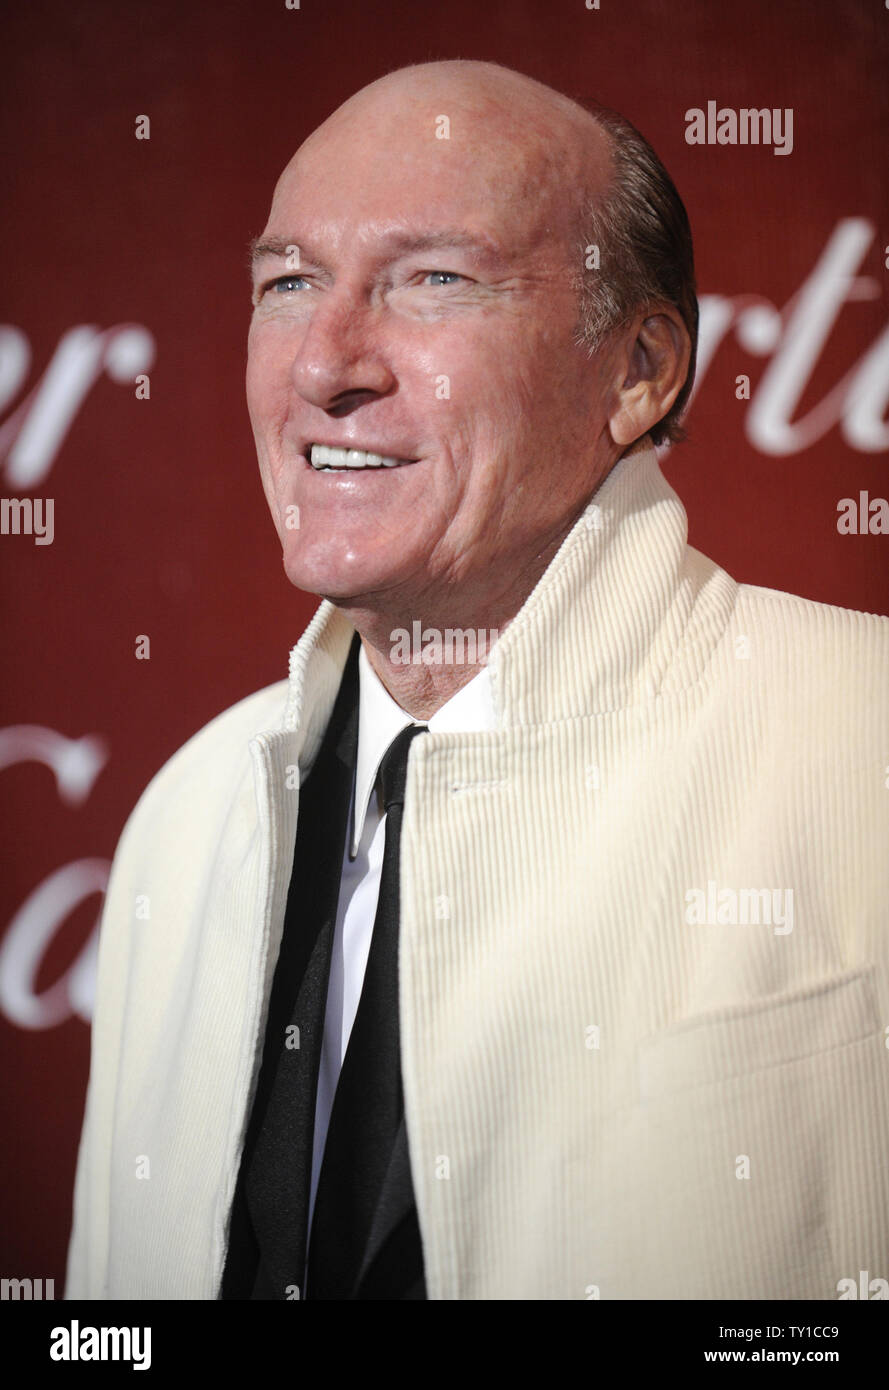 Actor Ed Lauter attends the Palm Springs International Film Festival Awards Gala in Palm Springs, California on January 5, 2010.      UPI/ Phil McCarten Stock Photo